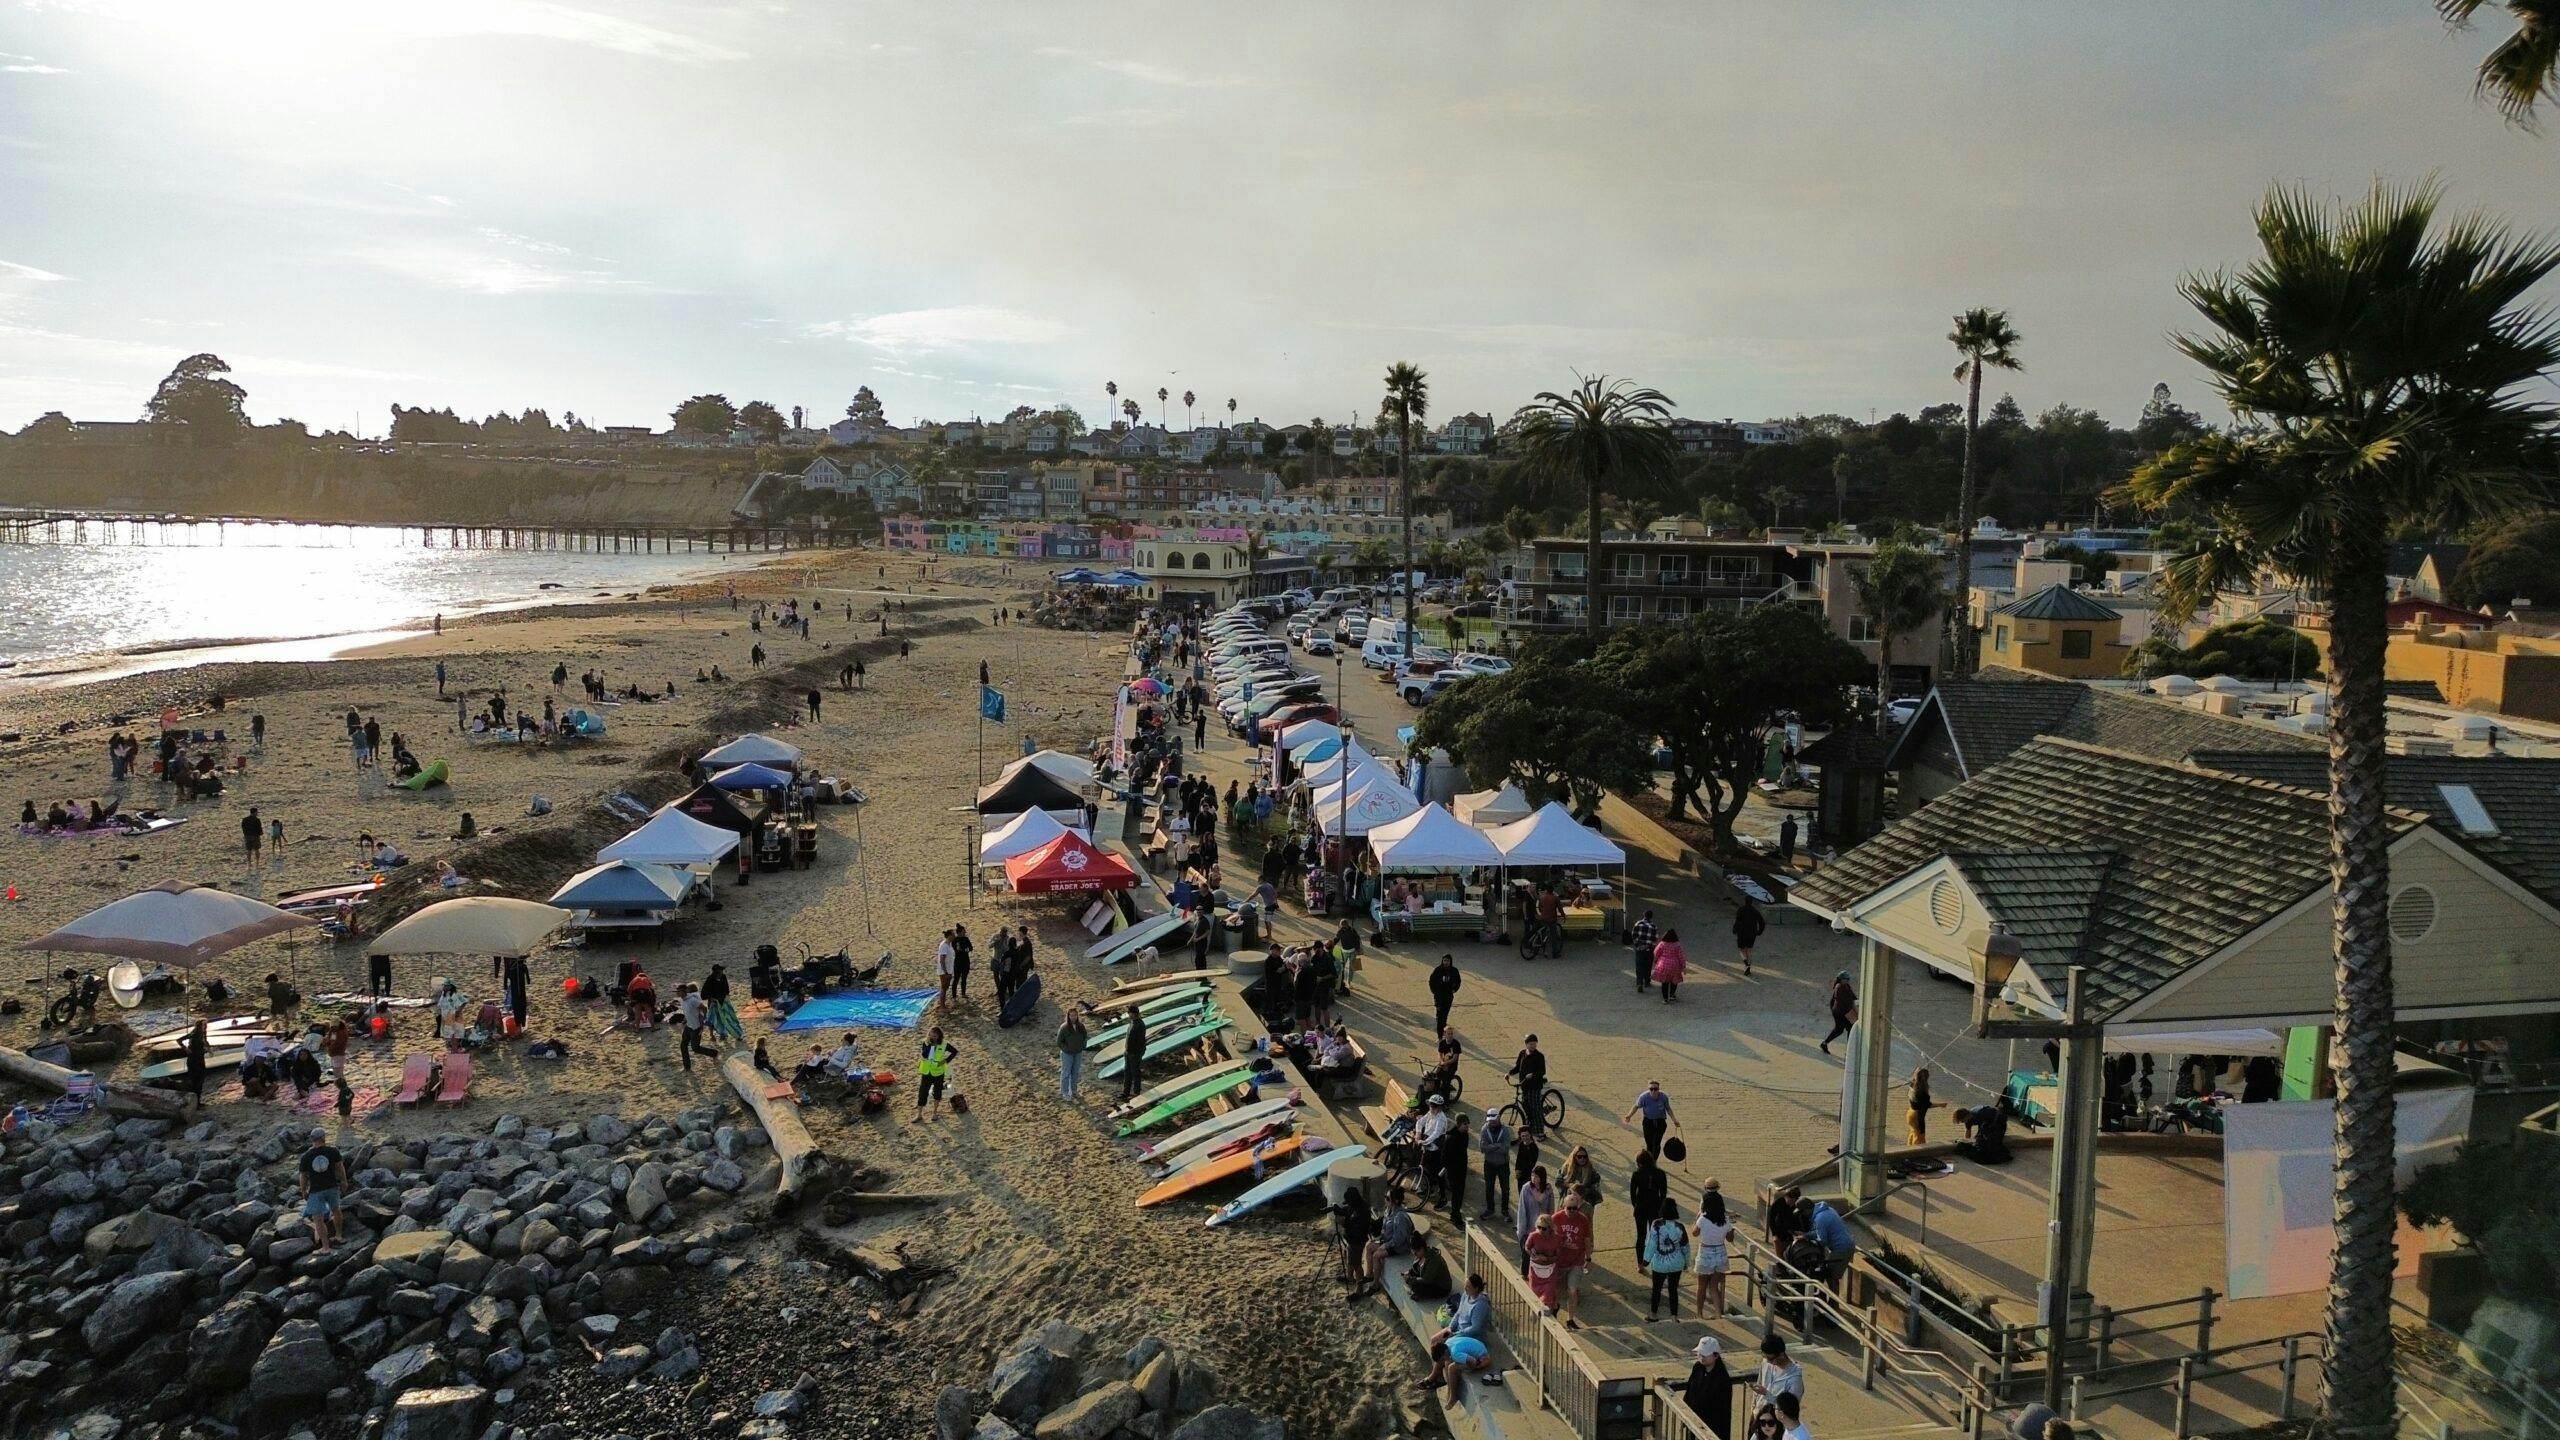 An aerial view of the Capitola Village Esplanade showing surfboards lined up against the wall bordering the sidewalk and beach and numerous people gathering